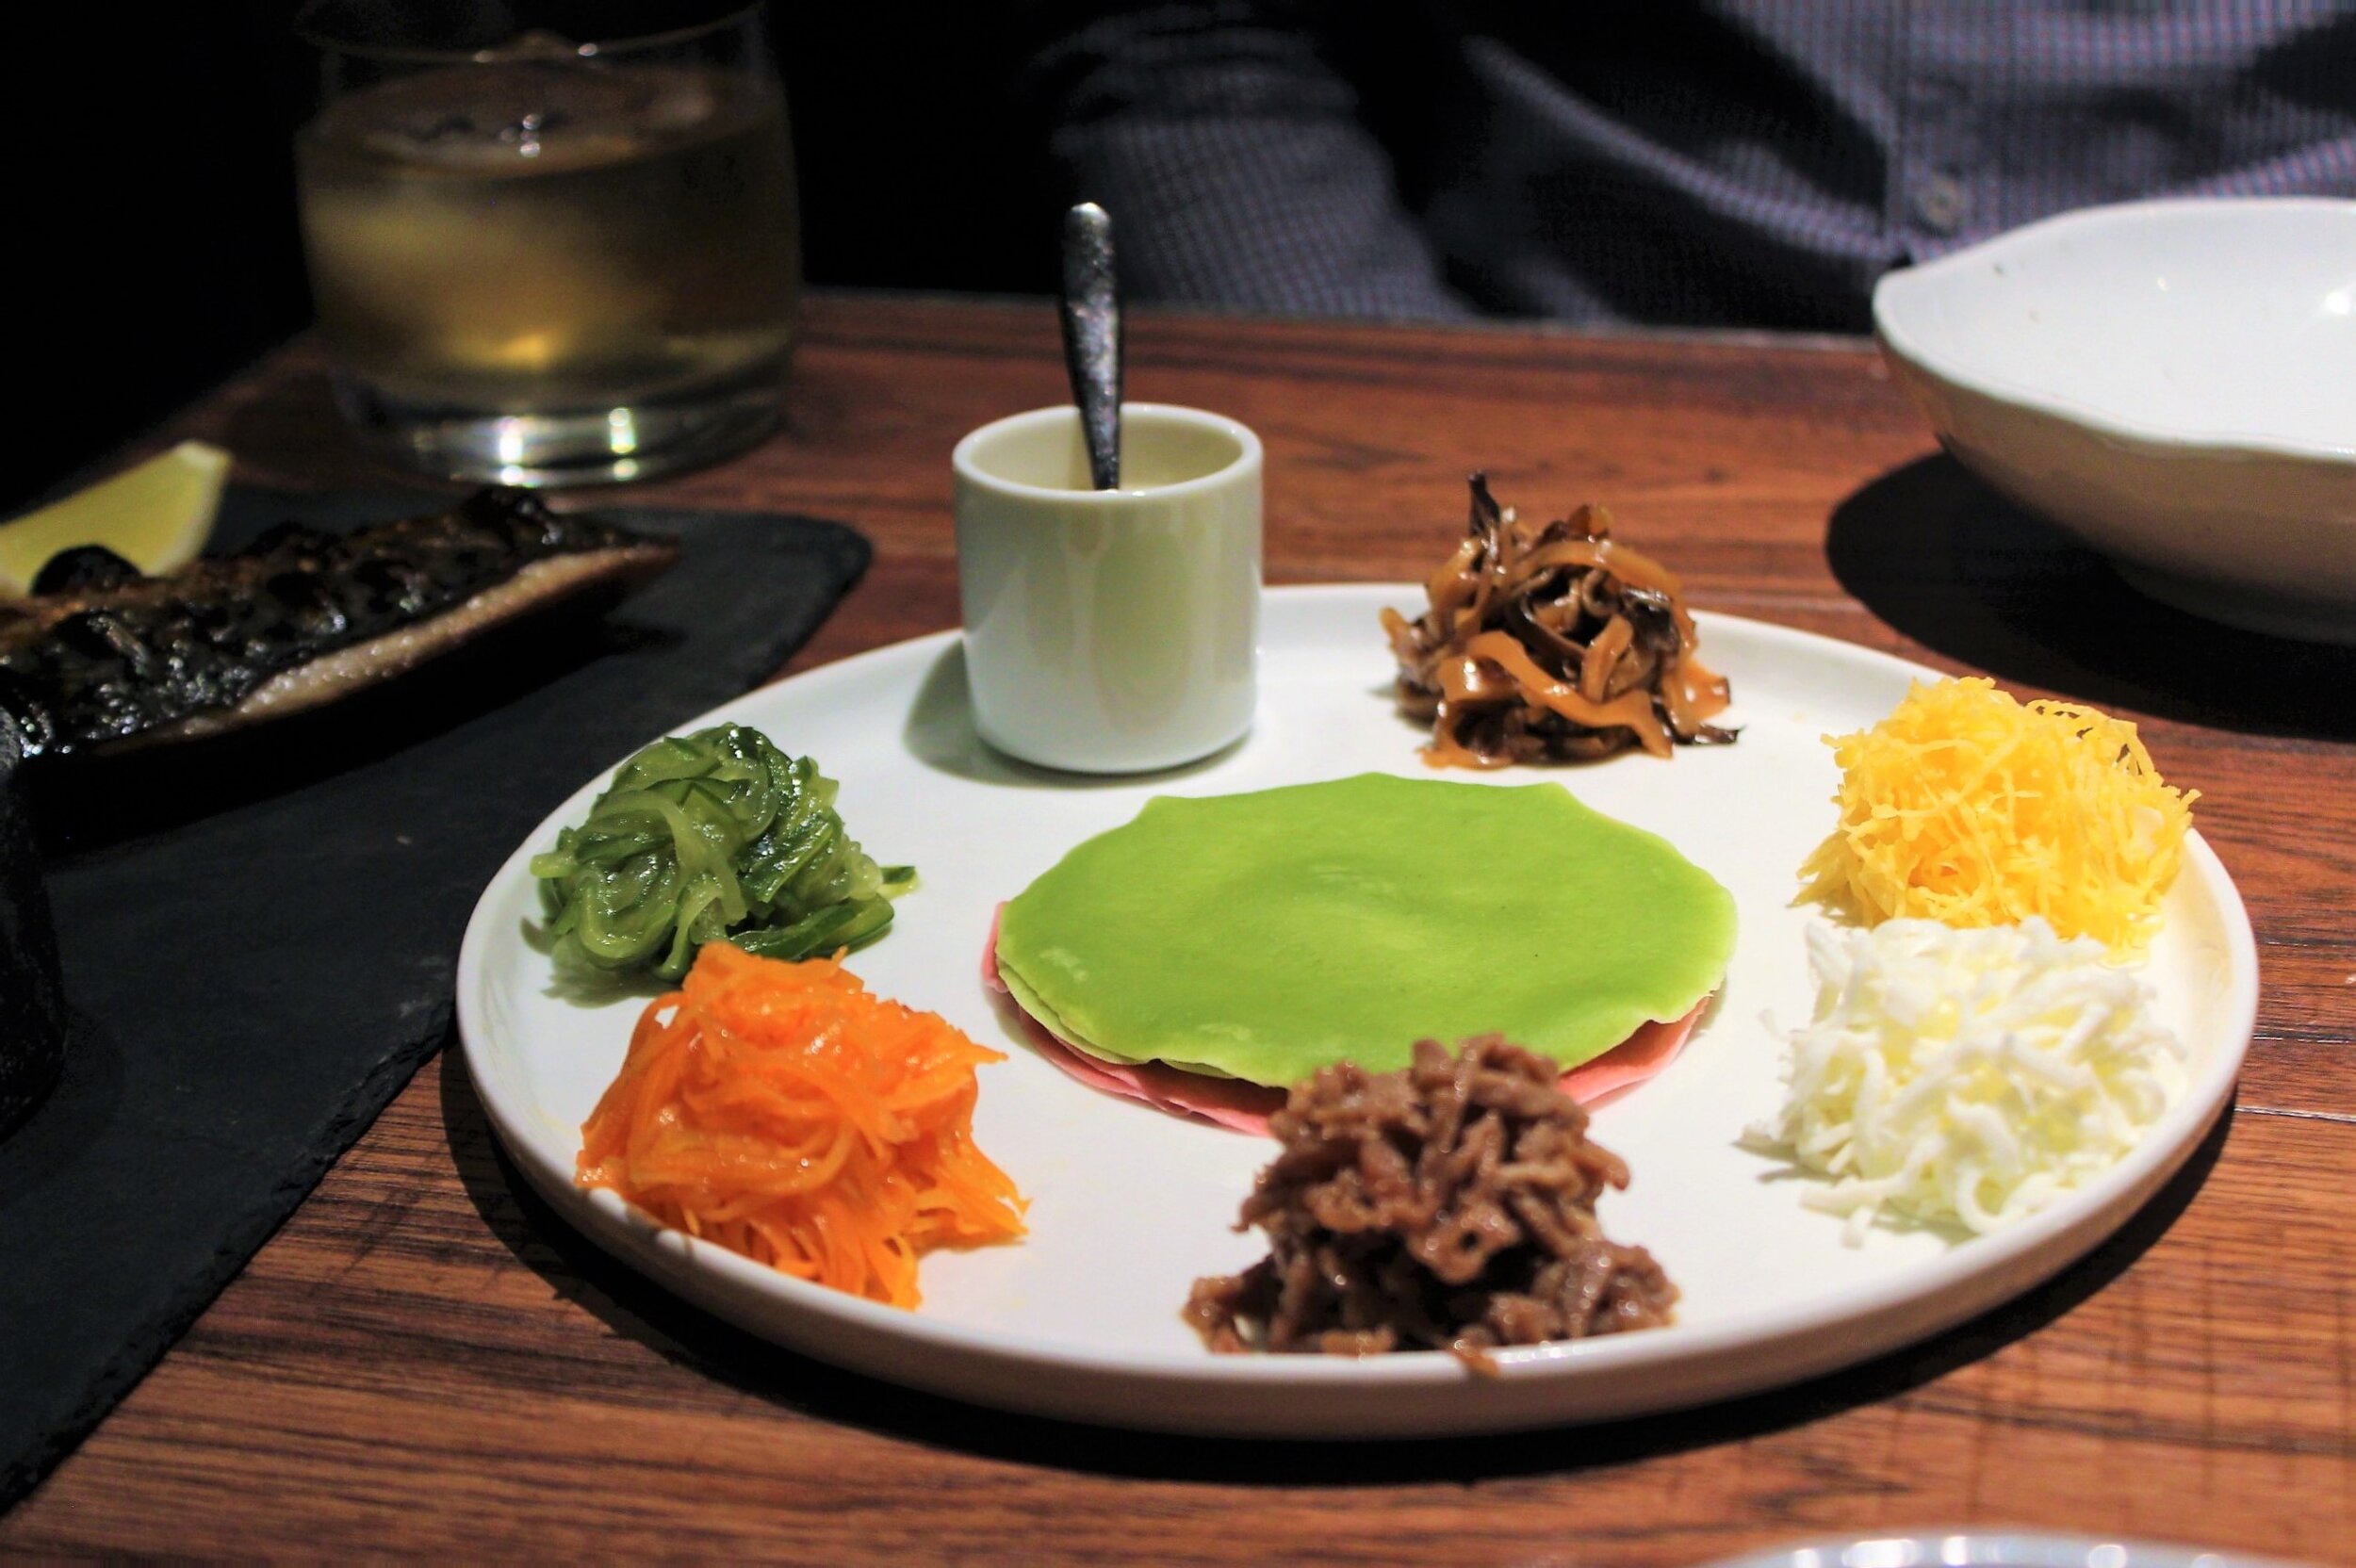 Chil-jeol-pan-Seven-Flavors-at-Oiji-in-New-York-City-3.JPG